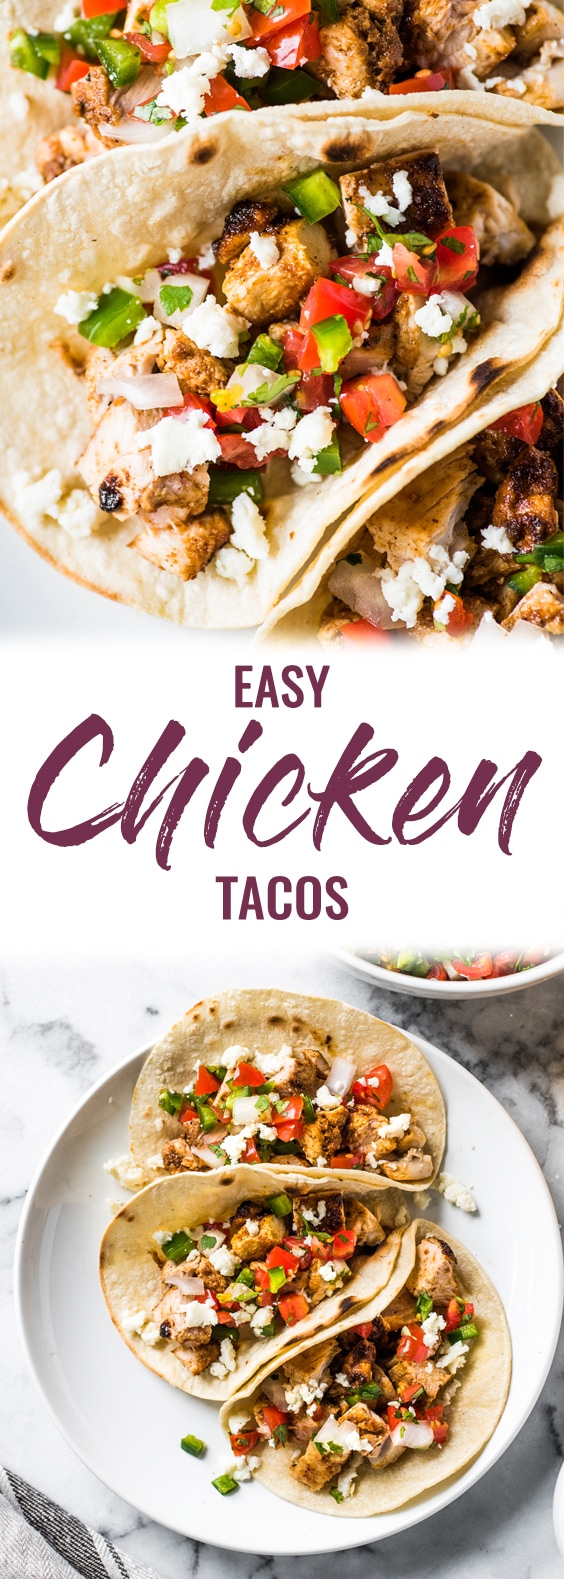 The BEST Easy Chicken Tacos - Isabel Eats